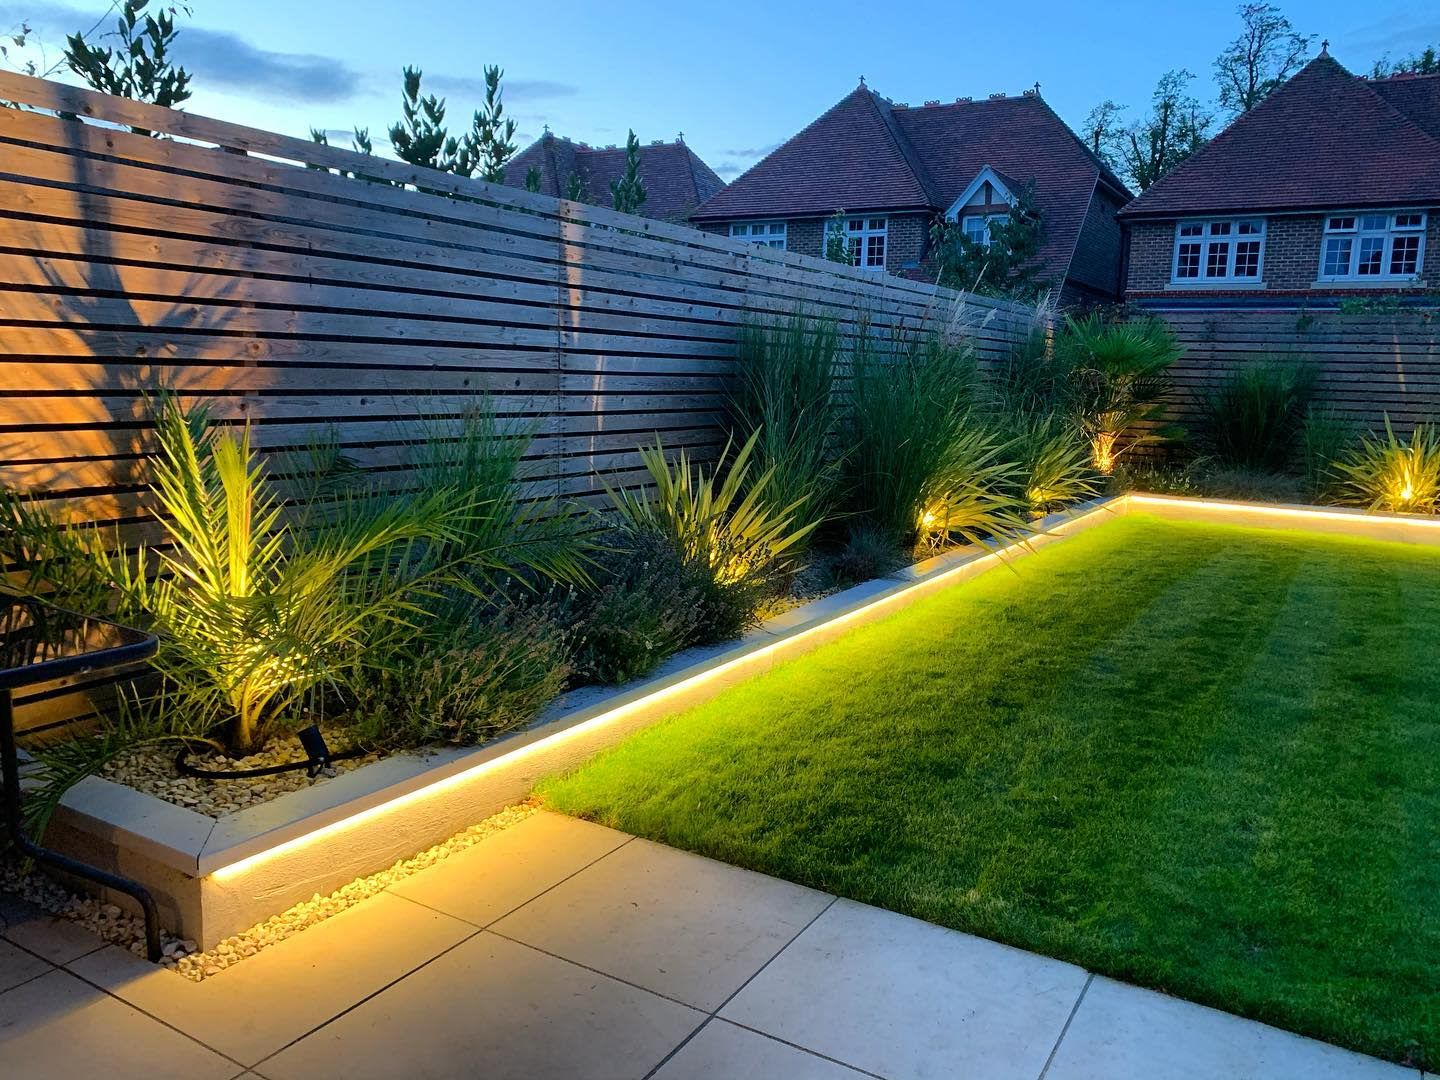 Garden design ideas that you can rely on